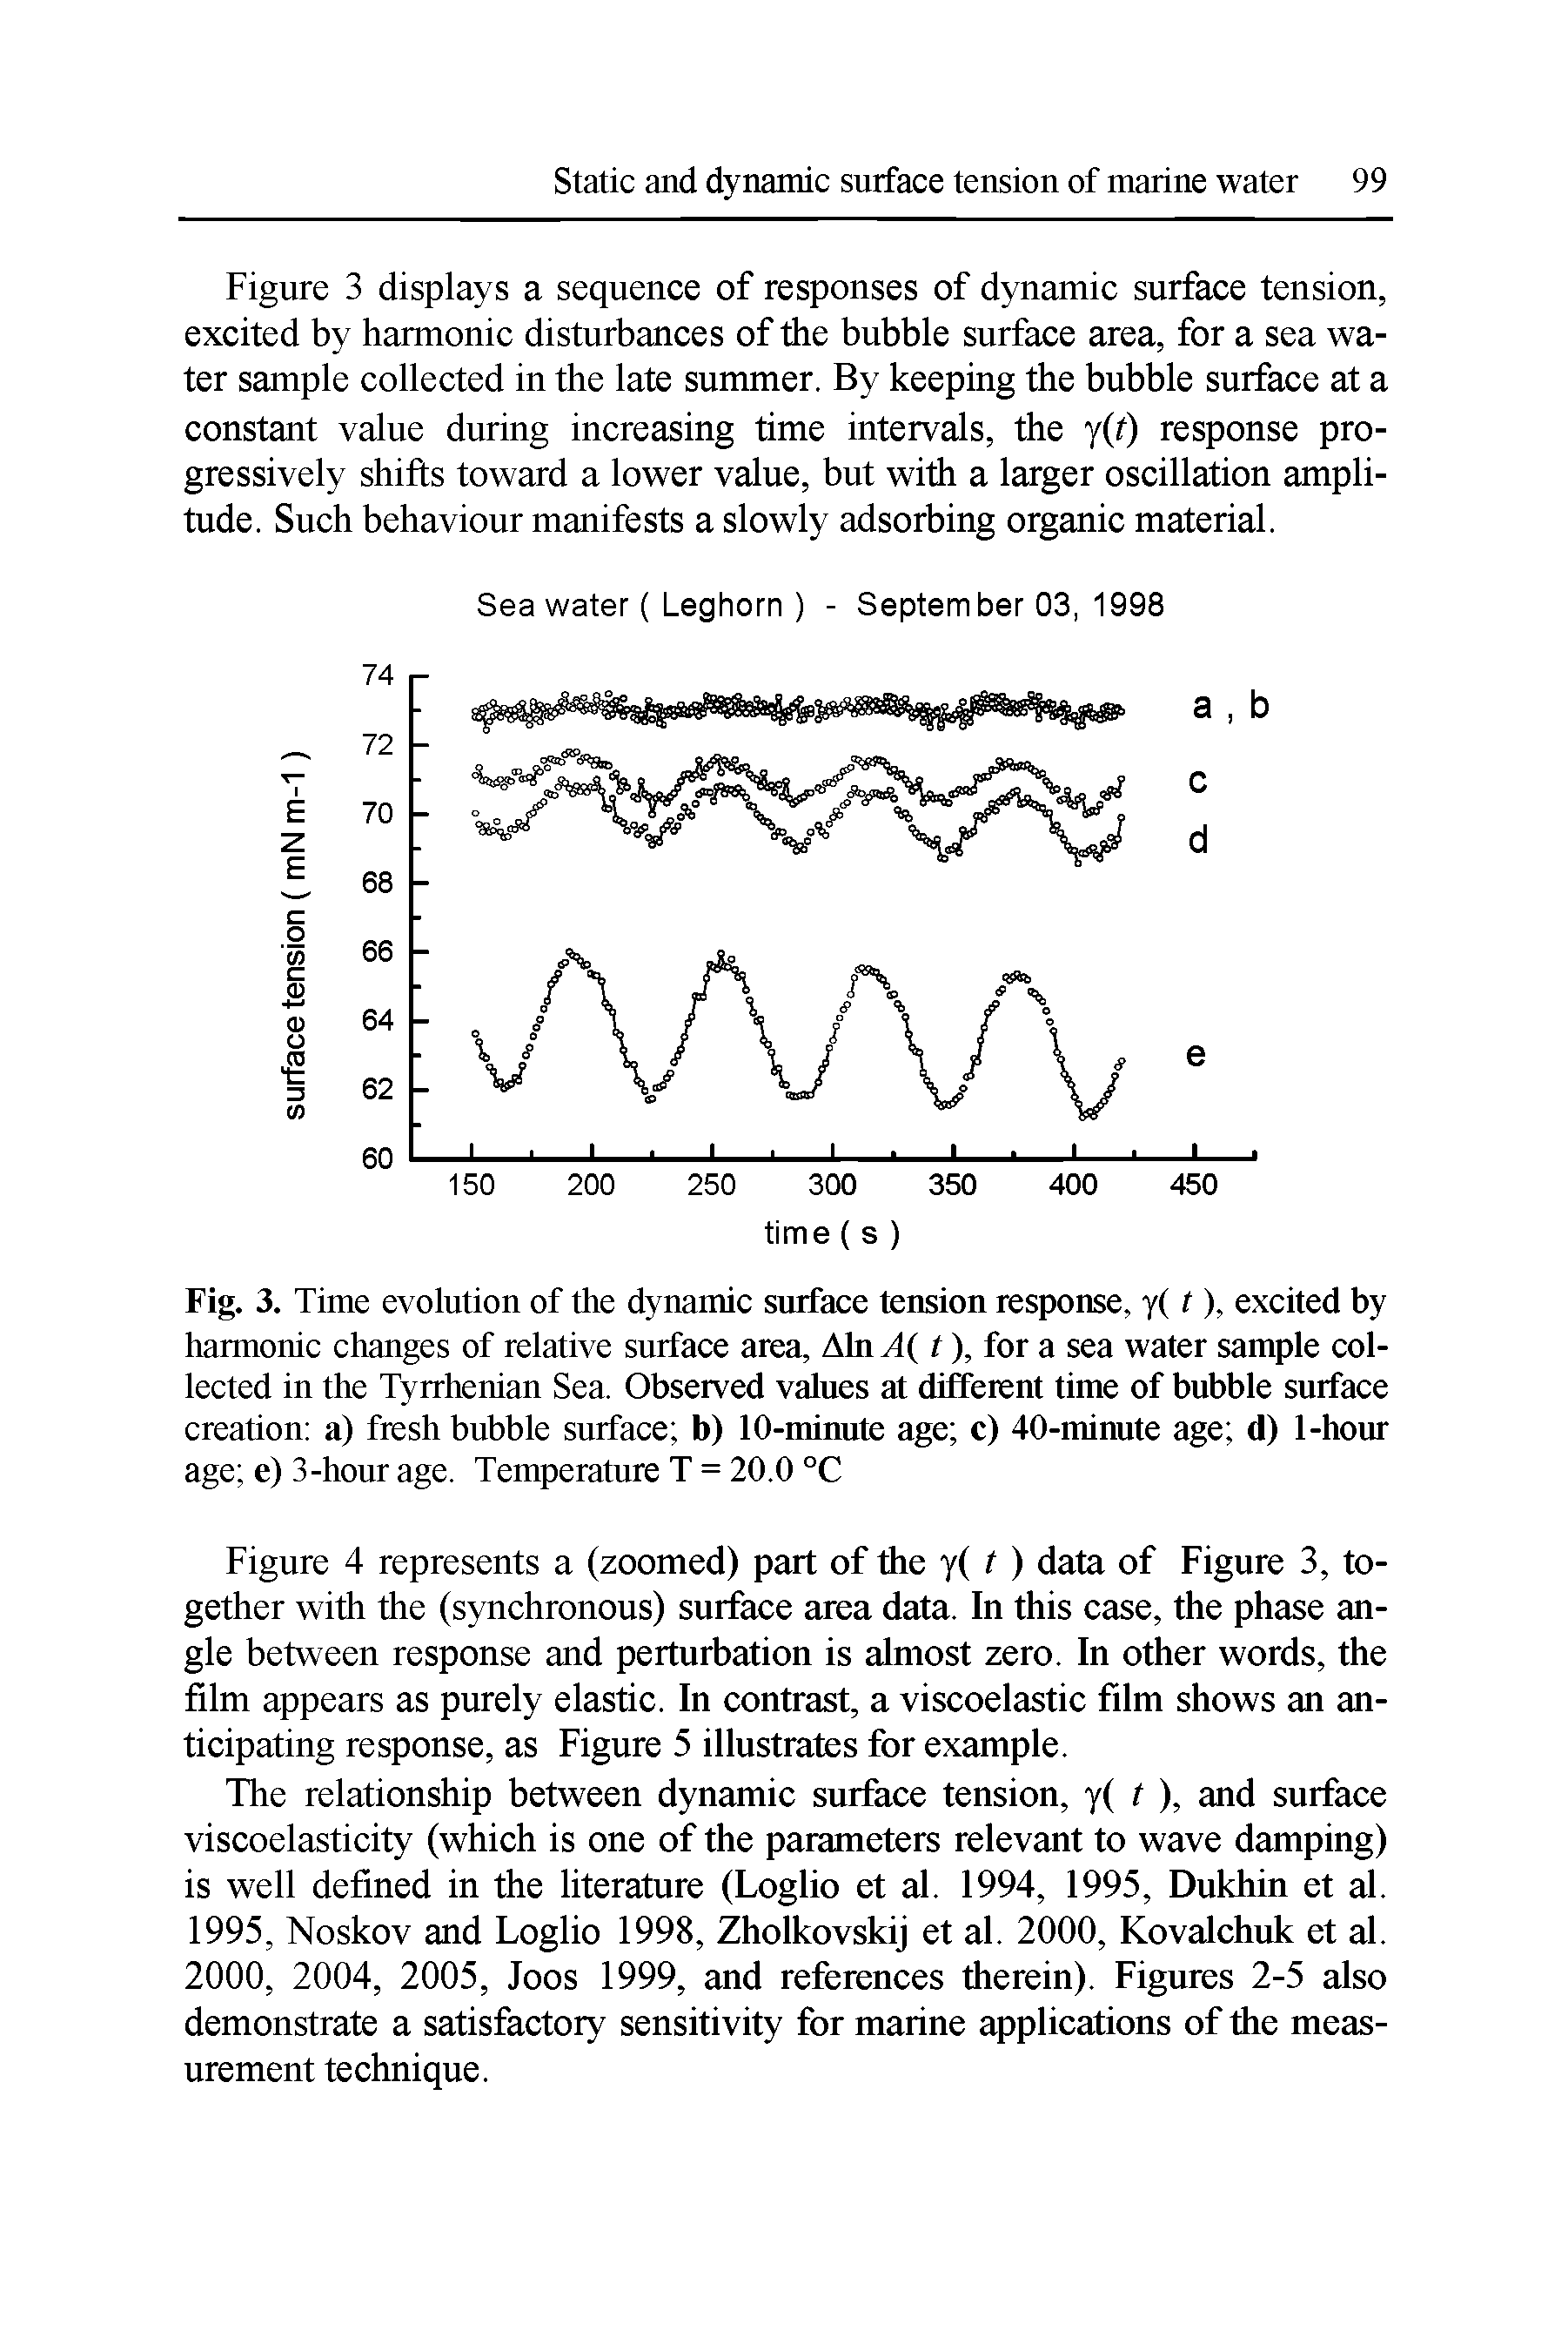 Fig. 3. Time evolution of the dynamic surface tension response, y( t), excited by harmonic changes of relative surface area, Ain A( t), for a sea water sample collected in the Tyrrhenian Sea. Observed values at different time of bubble surface creation a) fresh bubble surface b) 10-minute age c) 40-minute age d) 1-hour age e) 3-hour age. Temperature T = 20.0 °C...